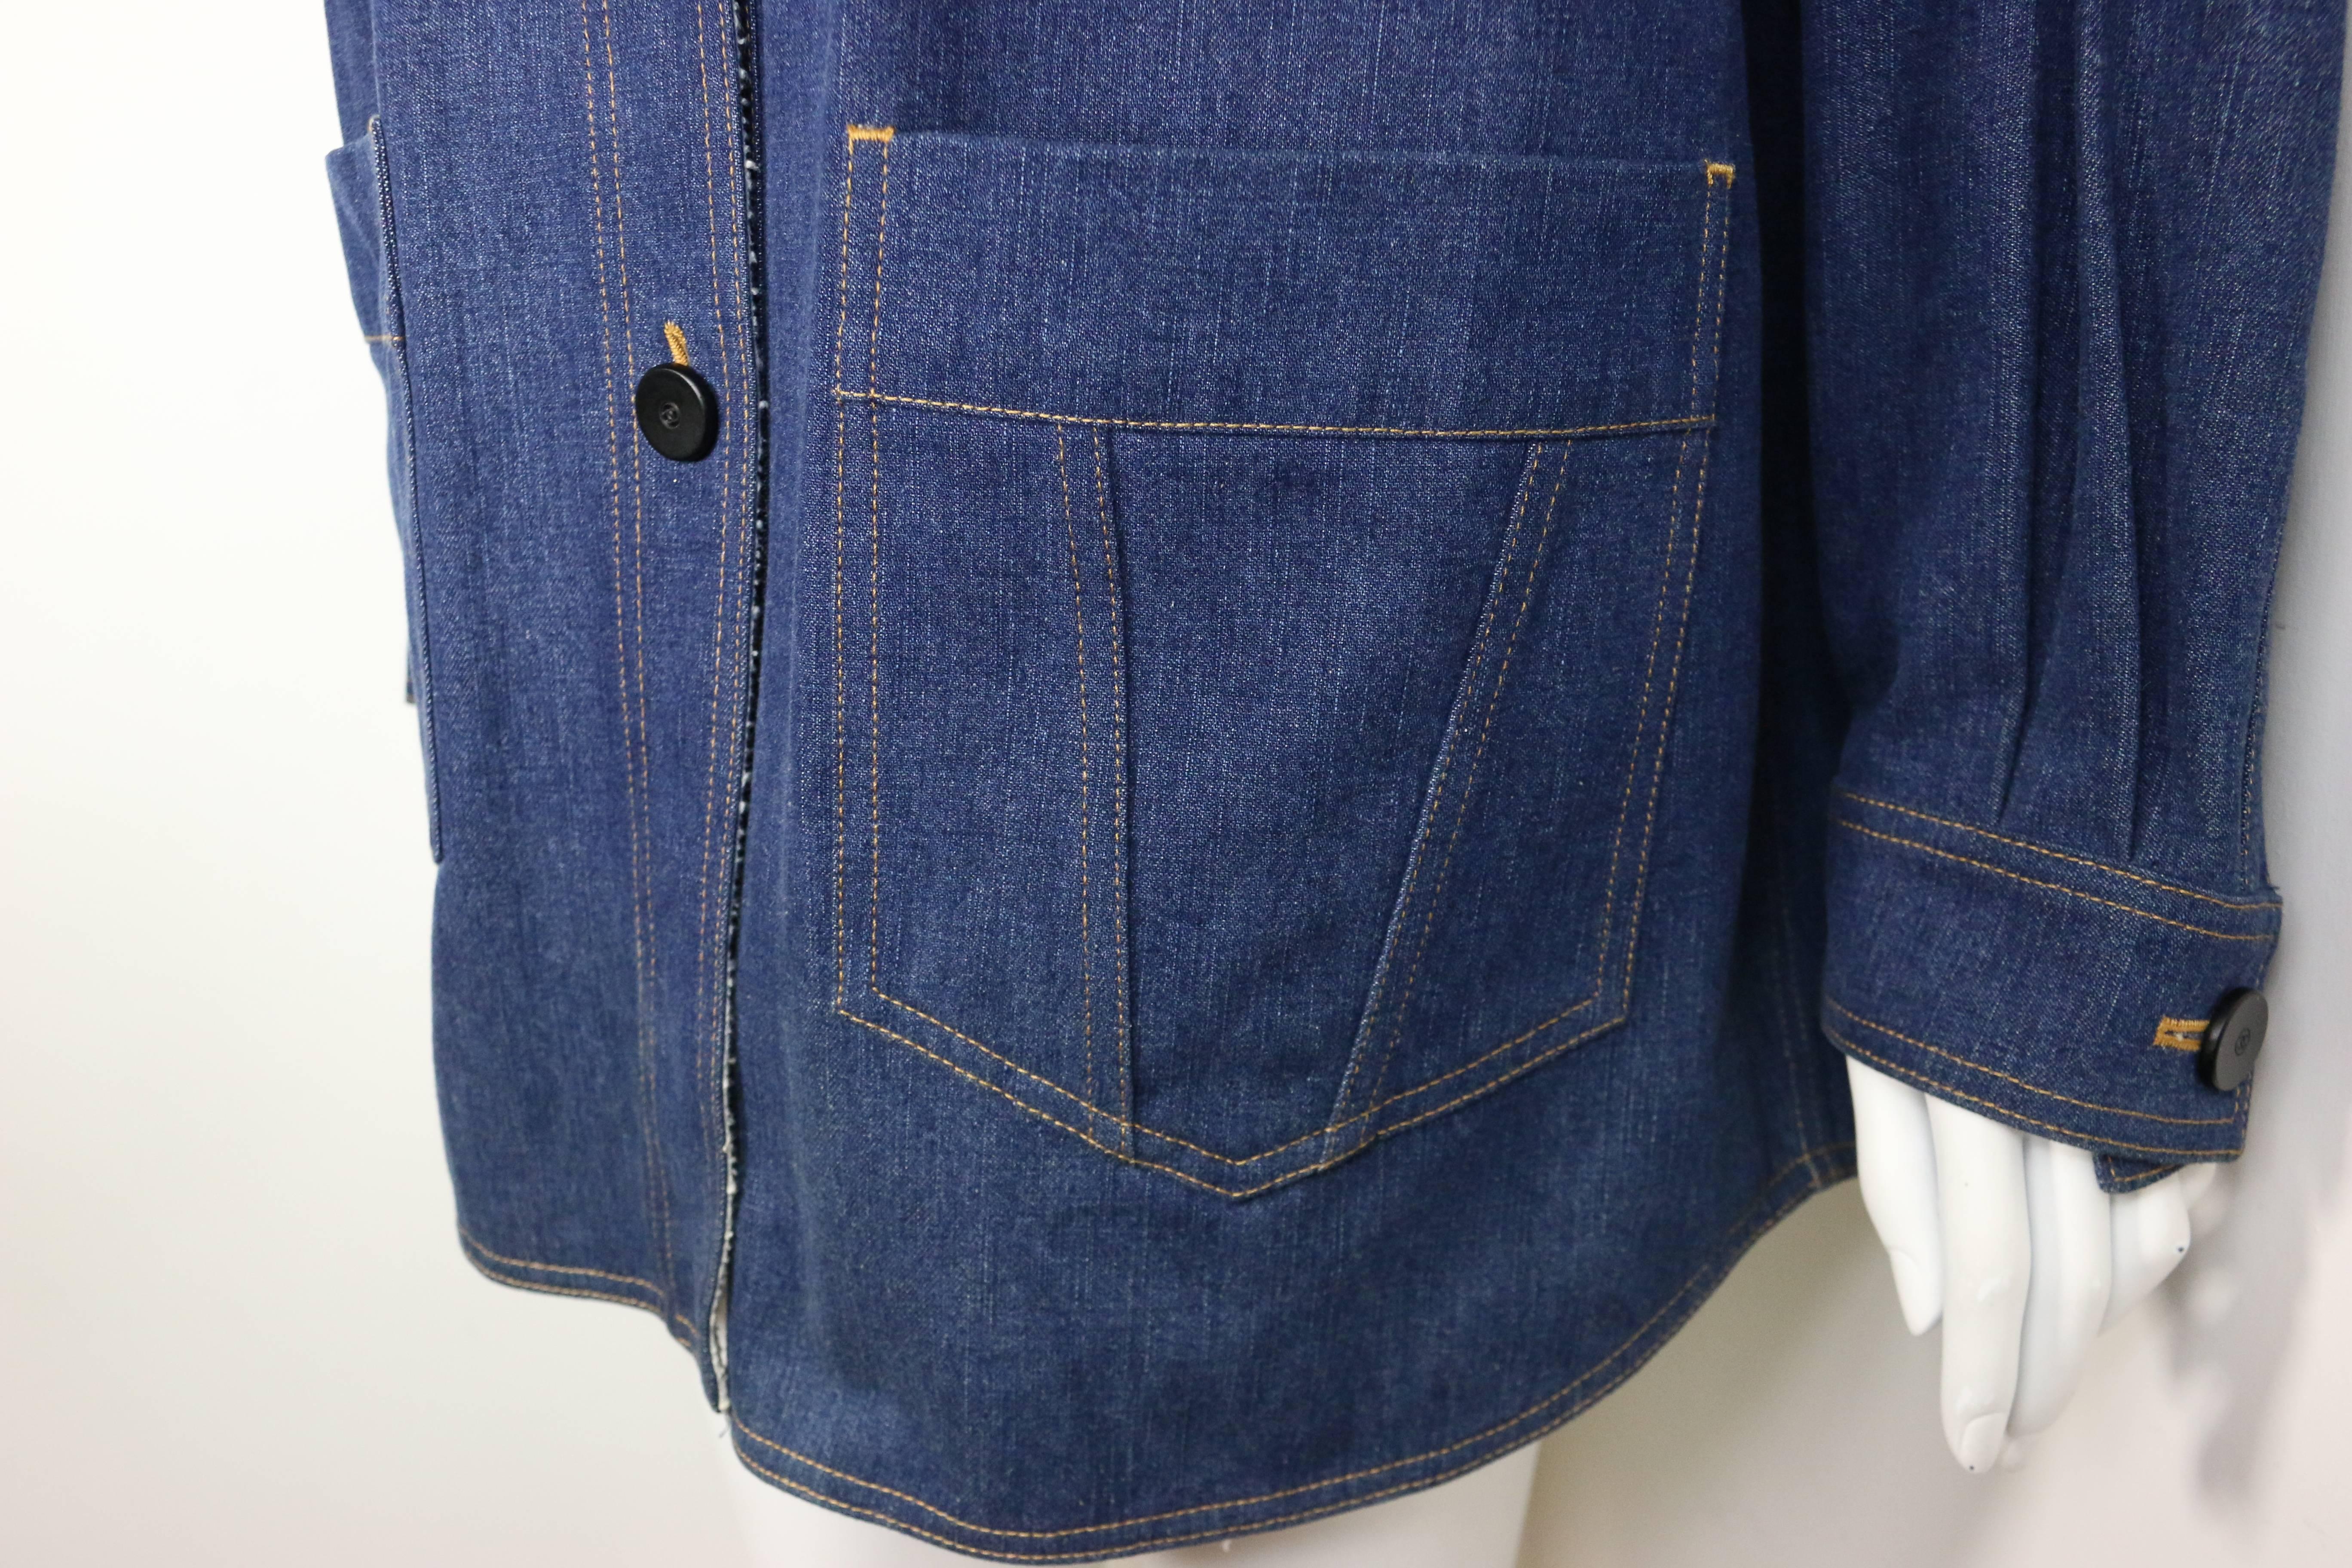 - Chanel Denim Jacket from 1999 cruise collection. 

- Featuring five front black "CC" logo buttons, two front pockets and one "CC" logo button on each cuff. 

- Made in France. 

- Size 38. 

- 100% cotton. Double